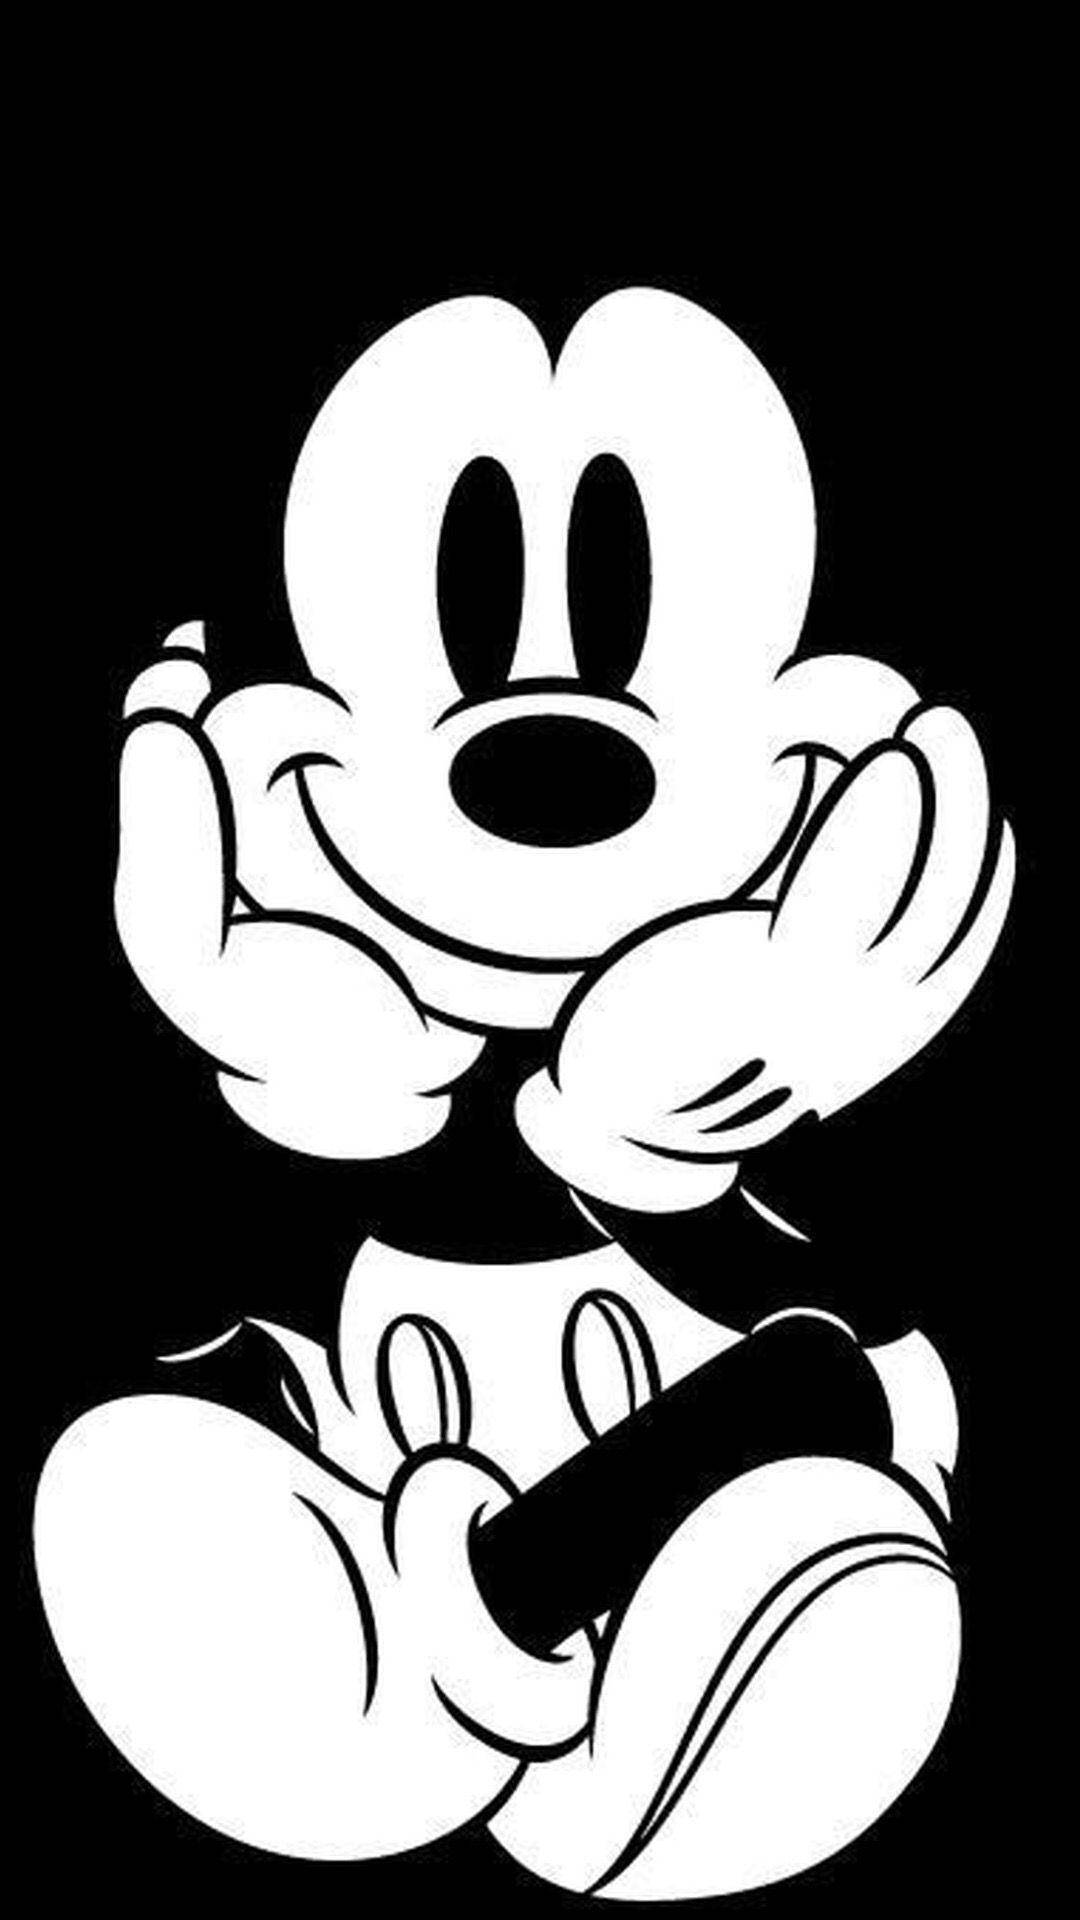 Black And White Mickey Mouse Iphone Wallpaper